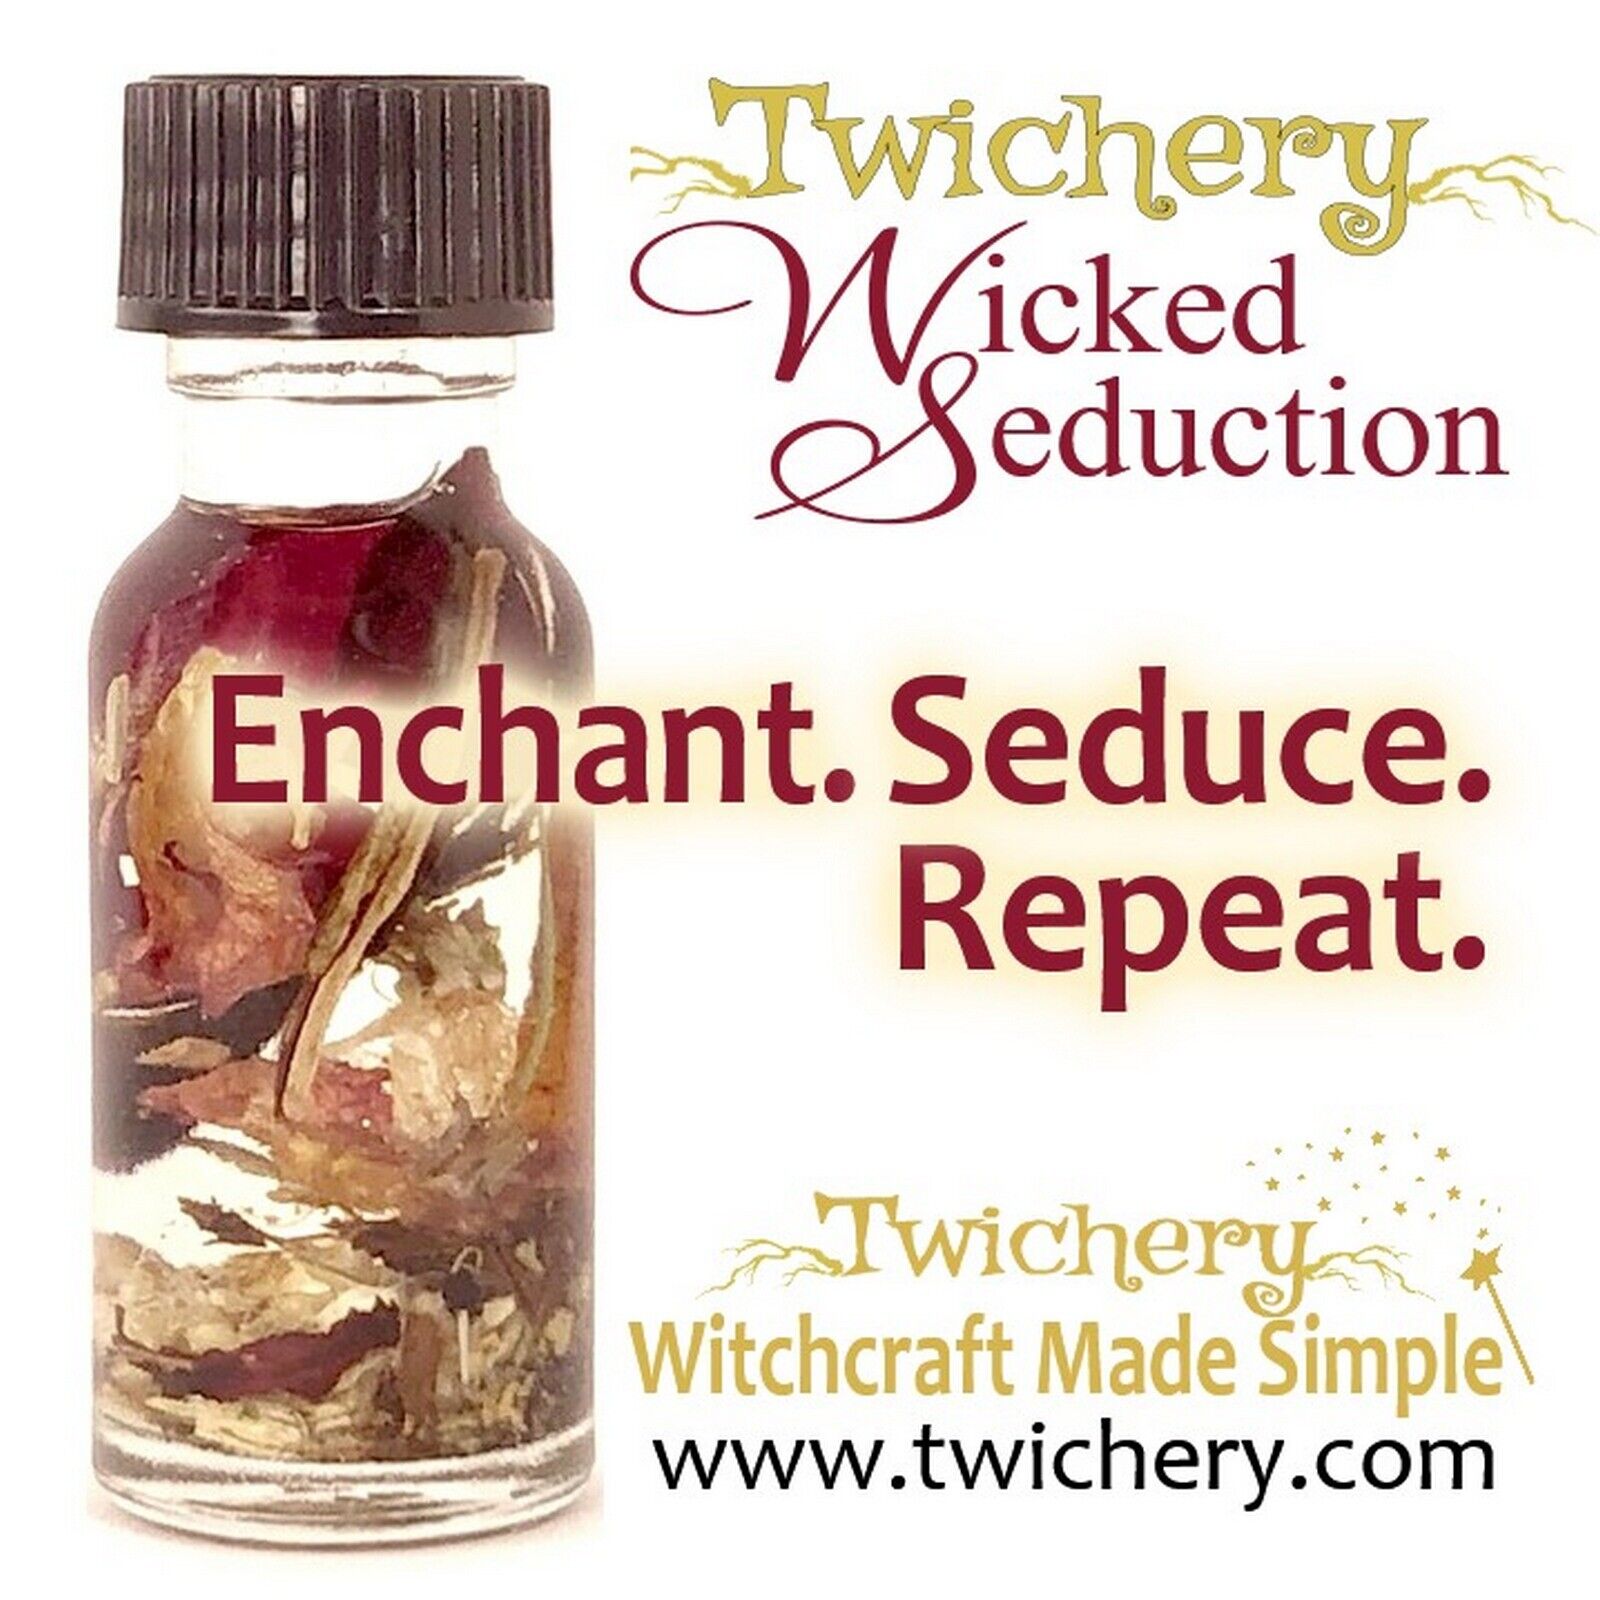 WICKED SEDUCTION OIL, Passion Lust Attraction Irresistible Hoodoo, FROM TWICHERY